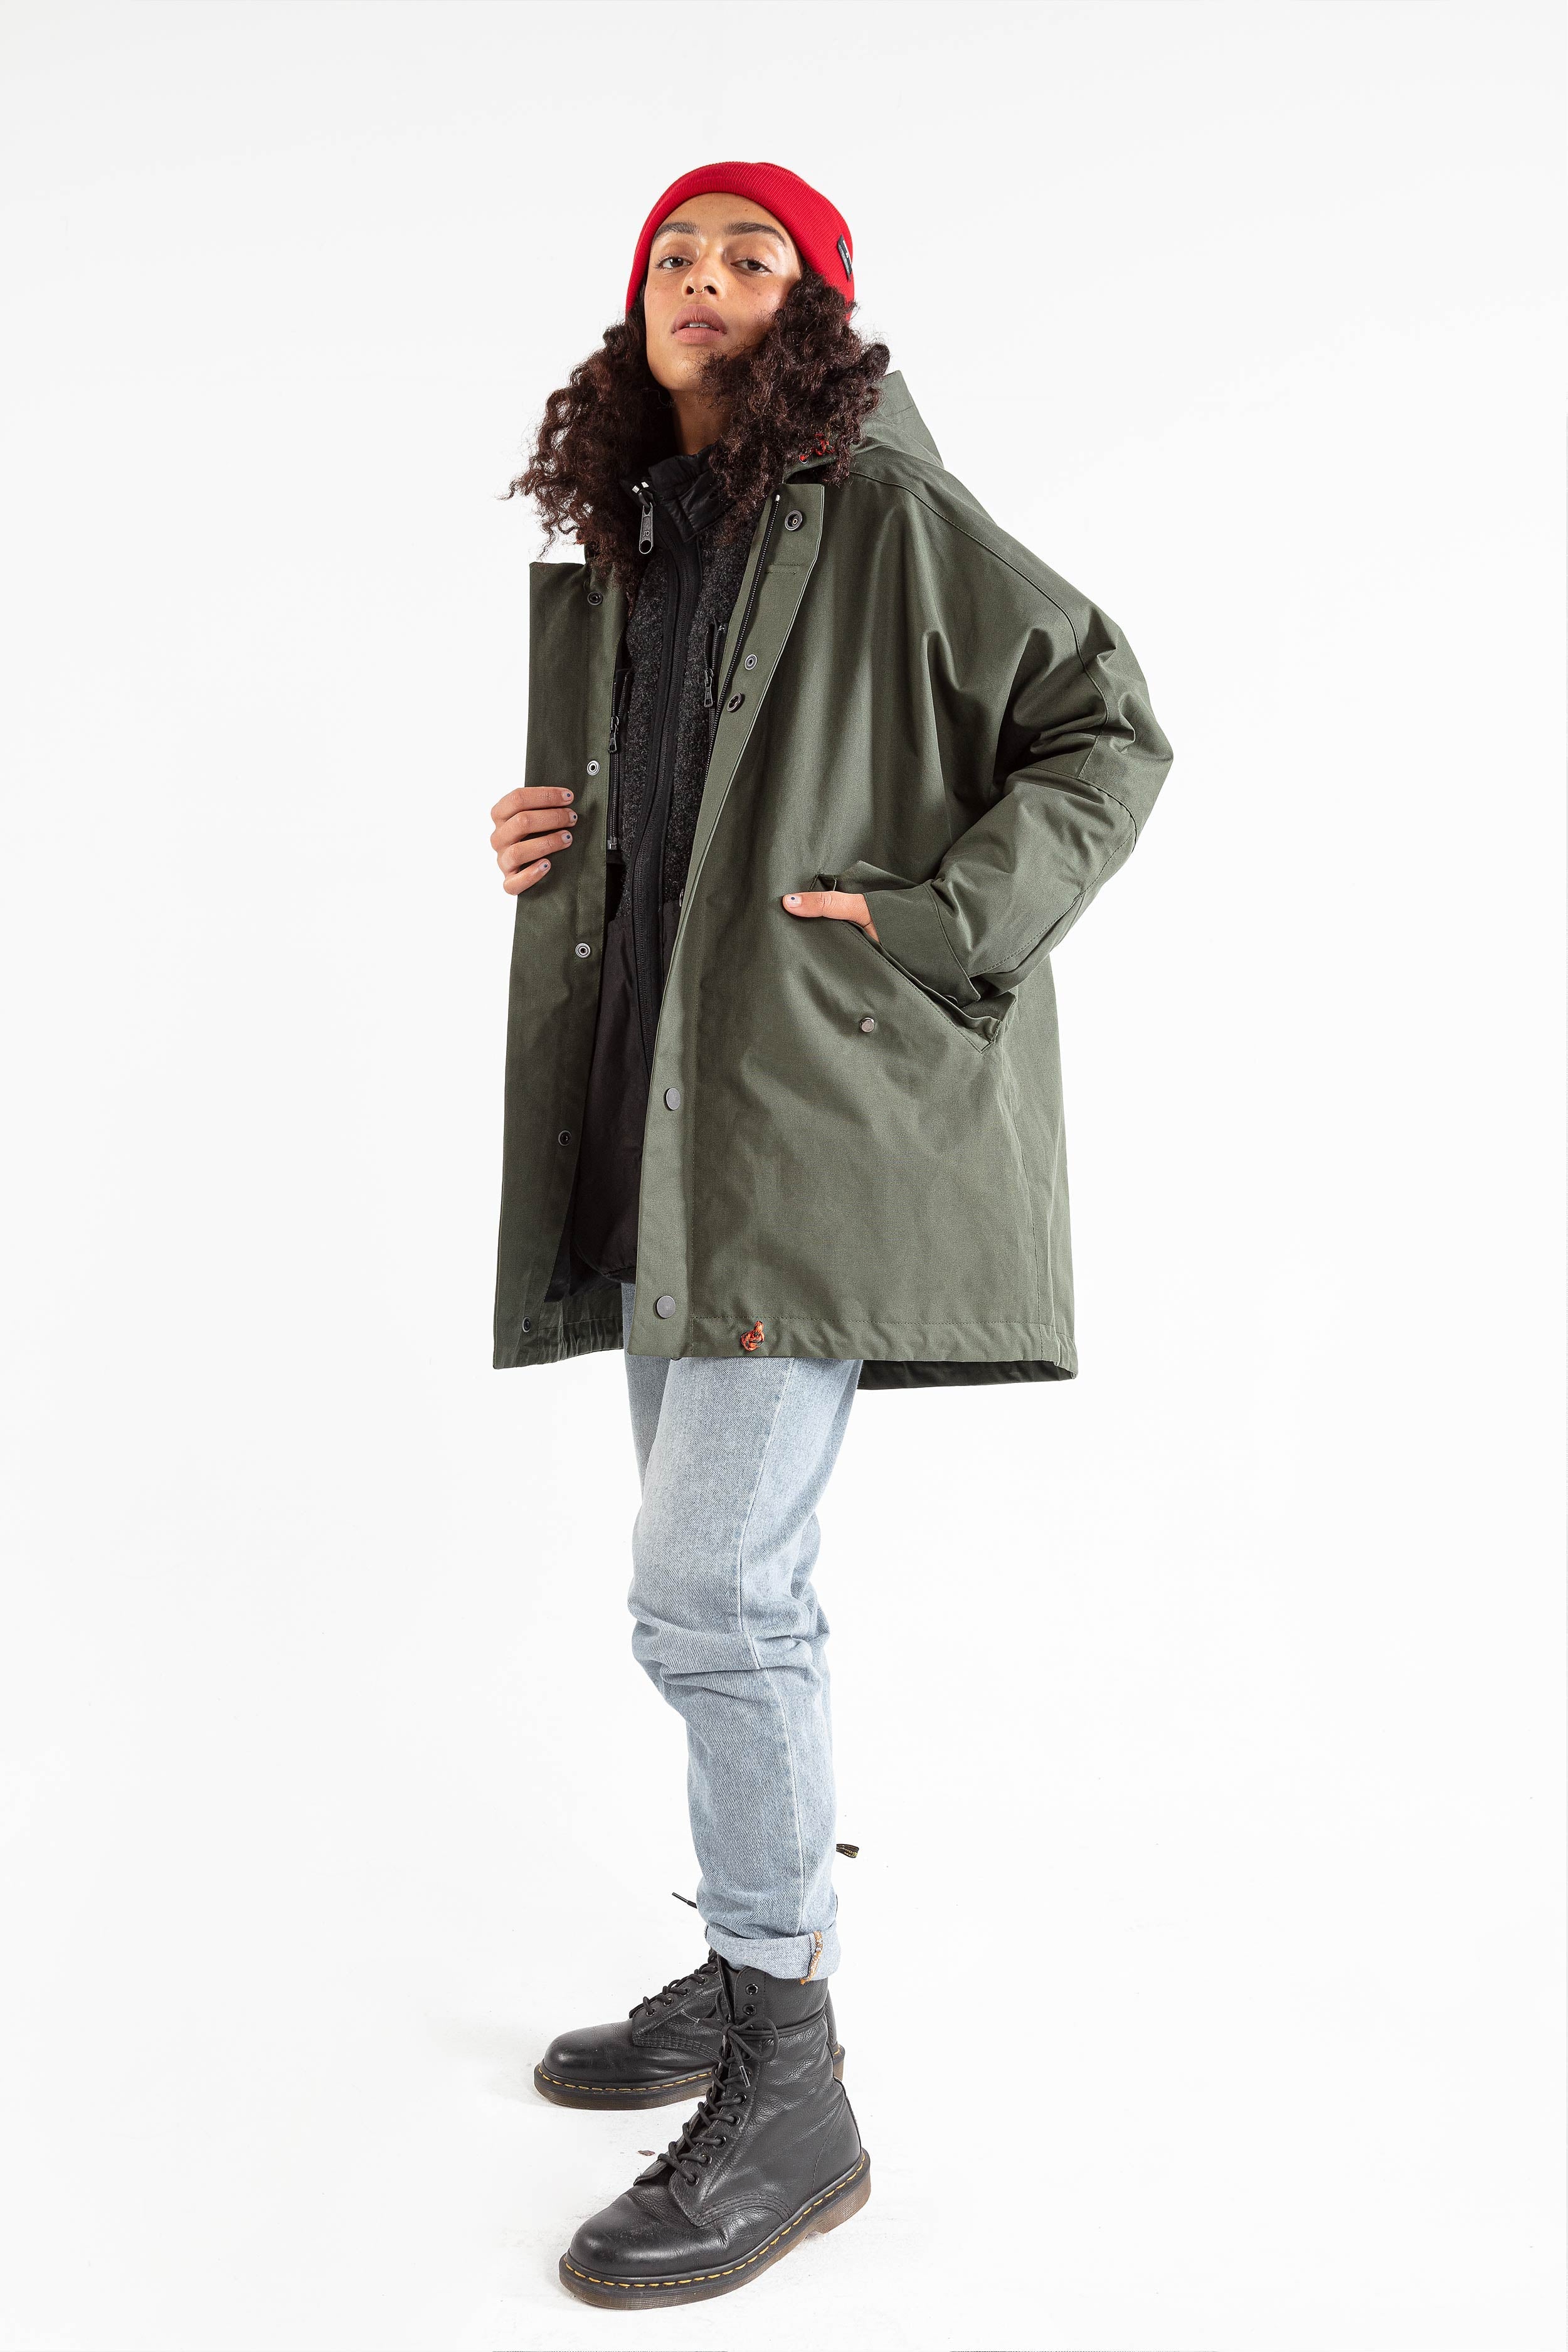 JECKYBENG-The-LADIES-COAT-03-wood-green